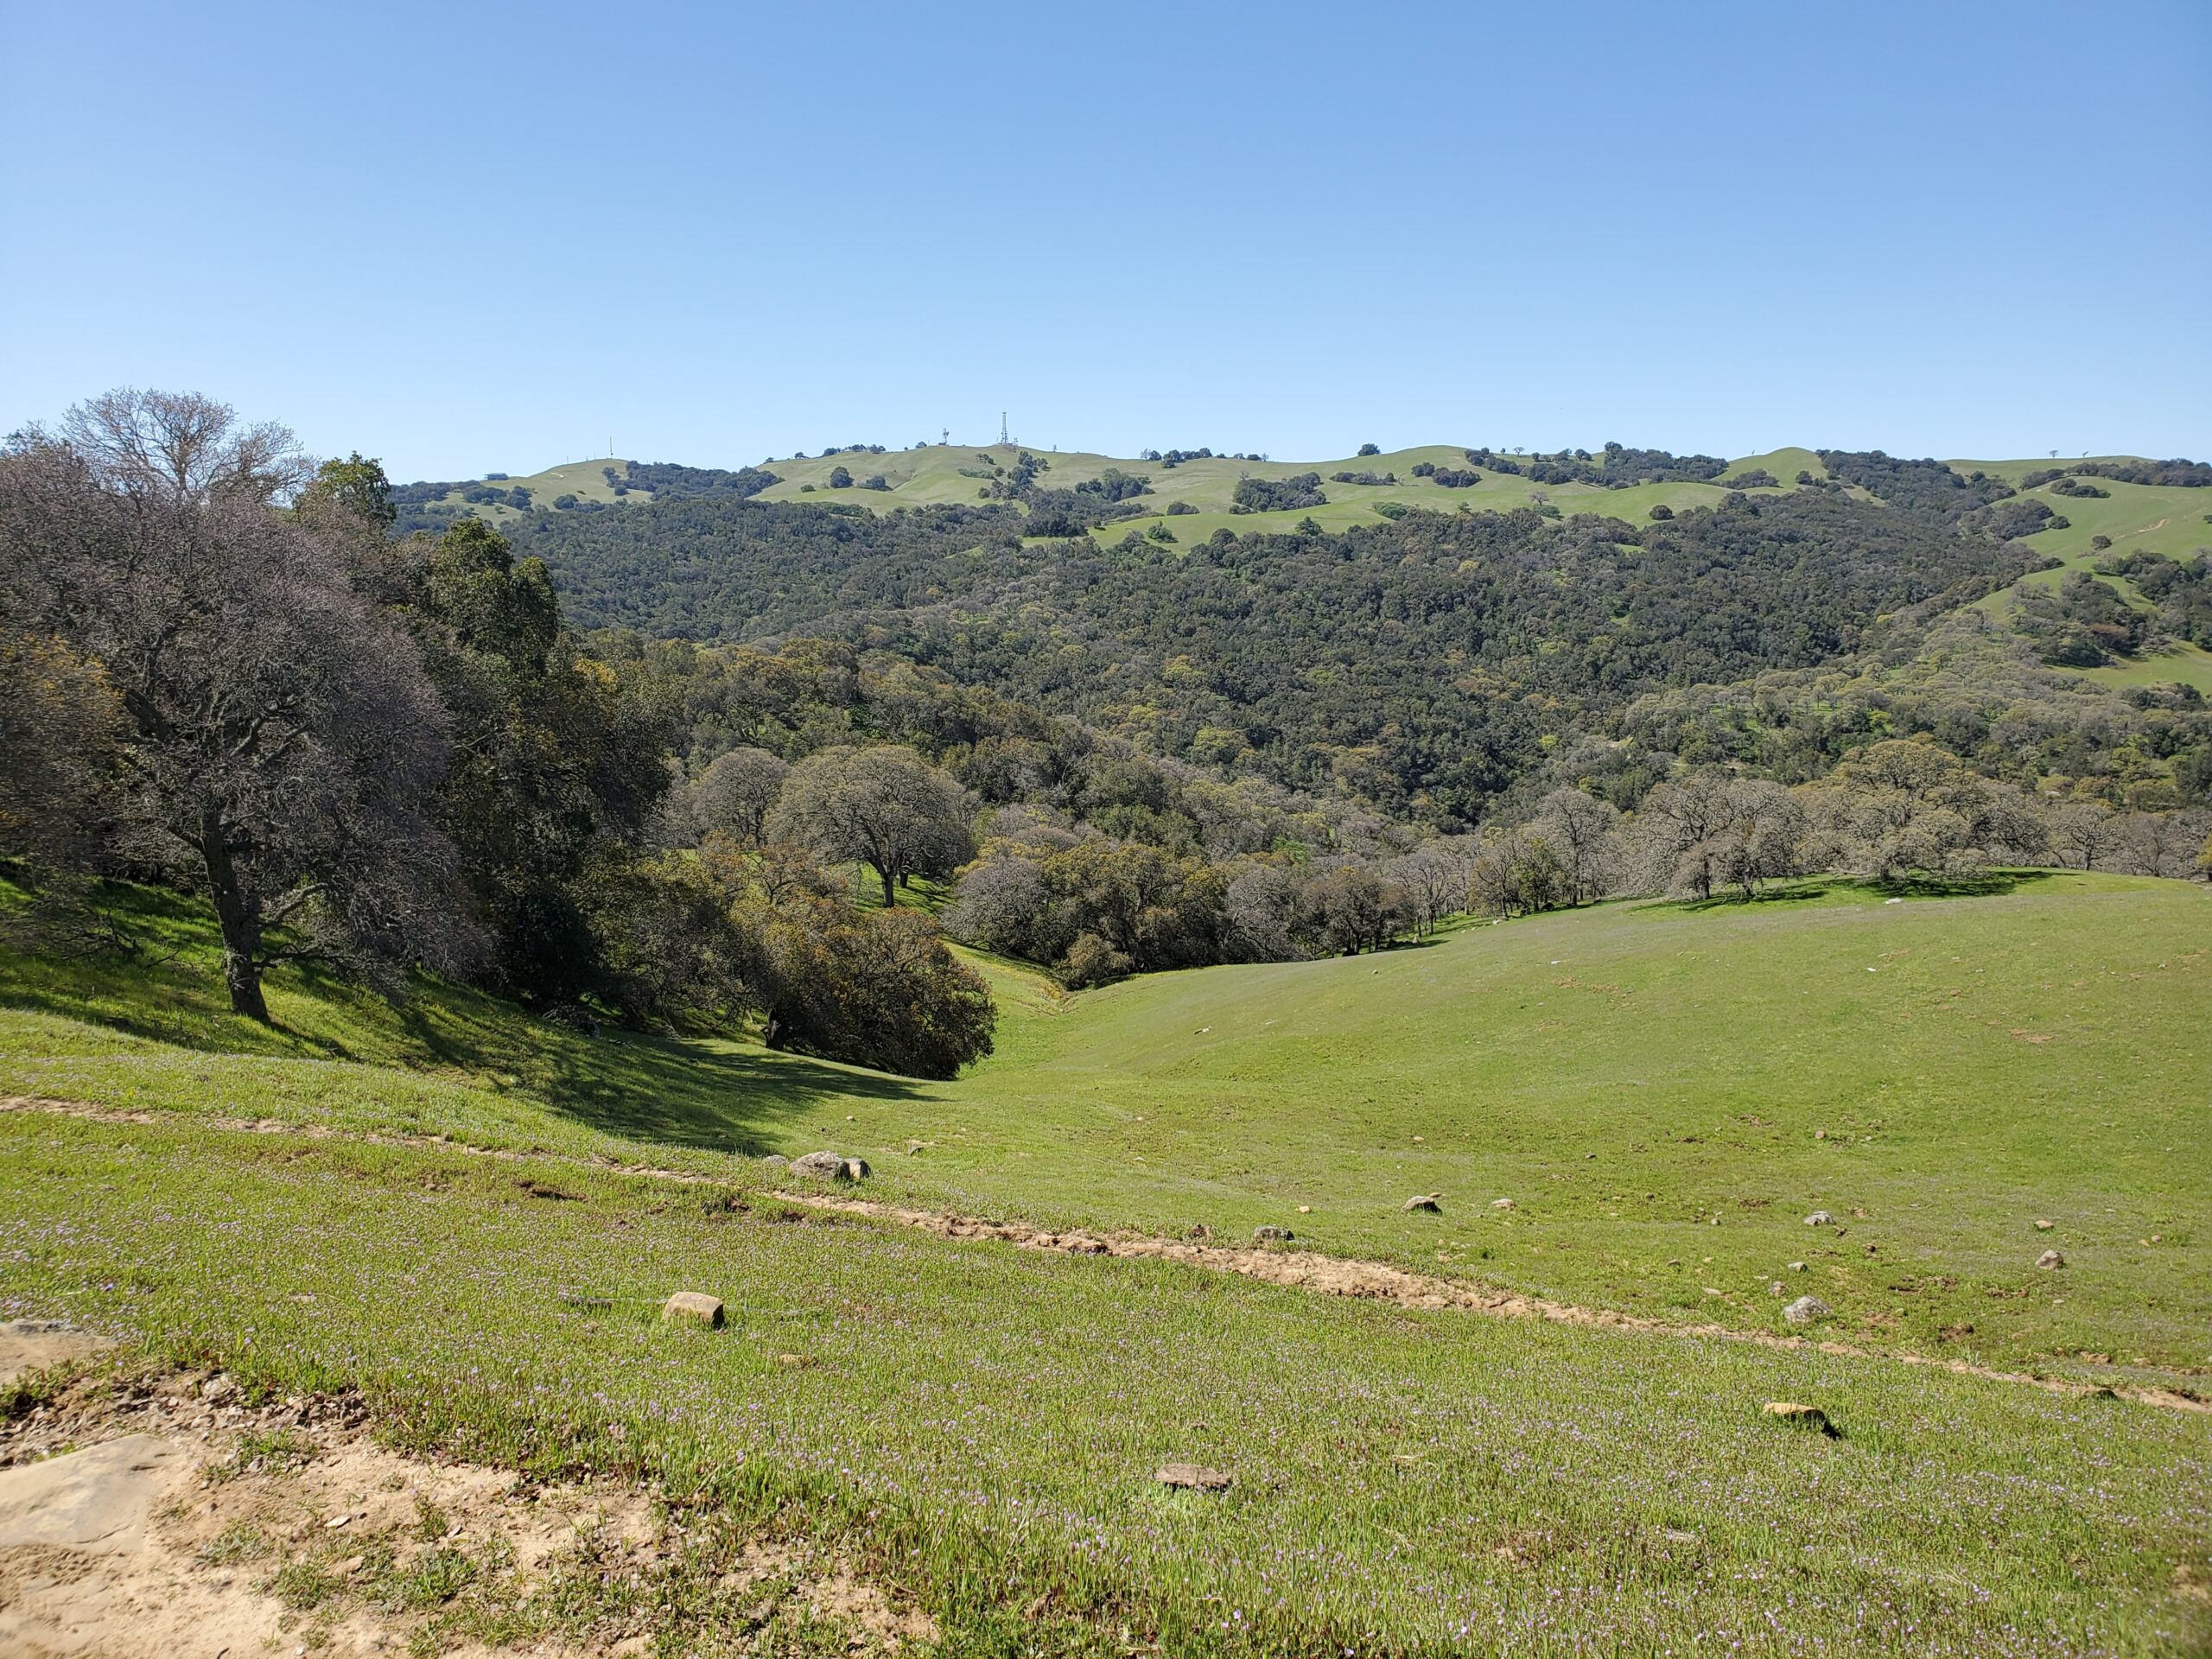 View from the Condor Trail in Morgan Territory Regional Preserve.